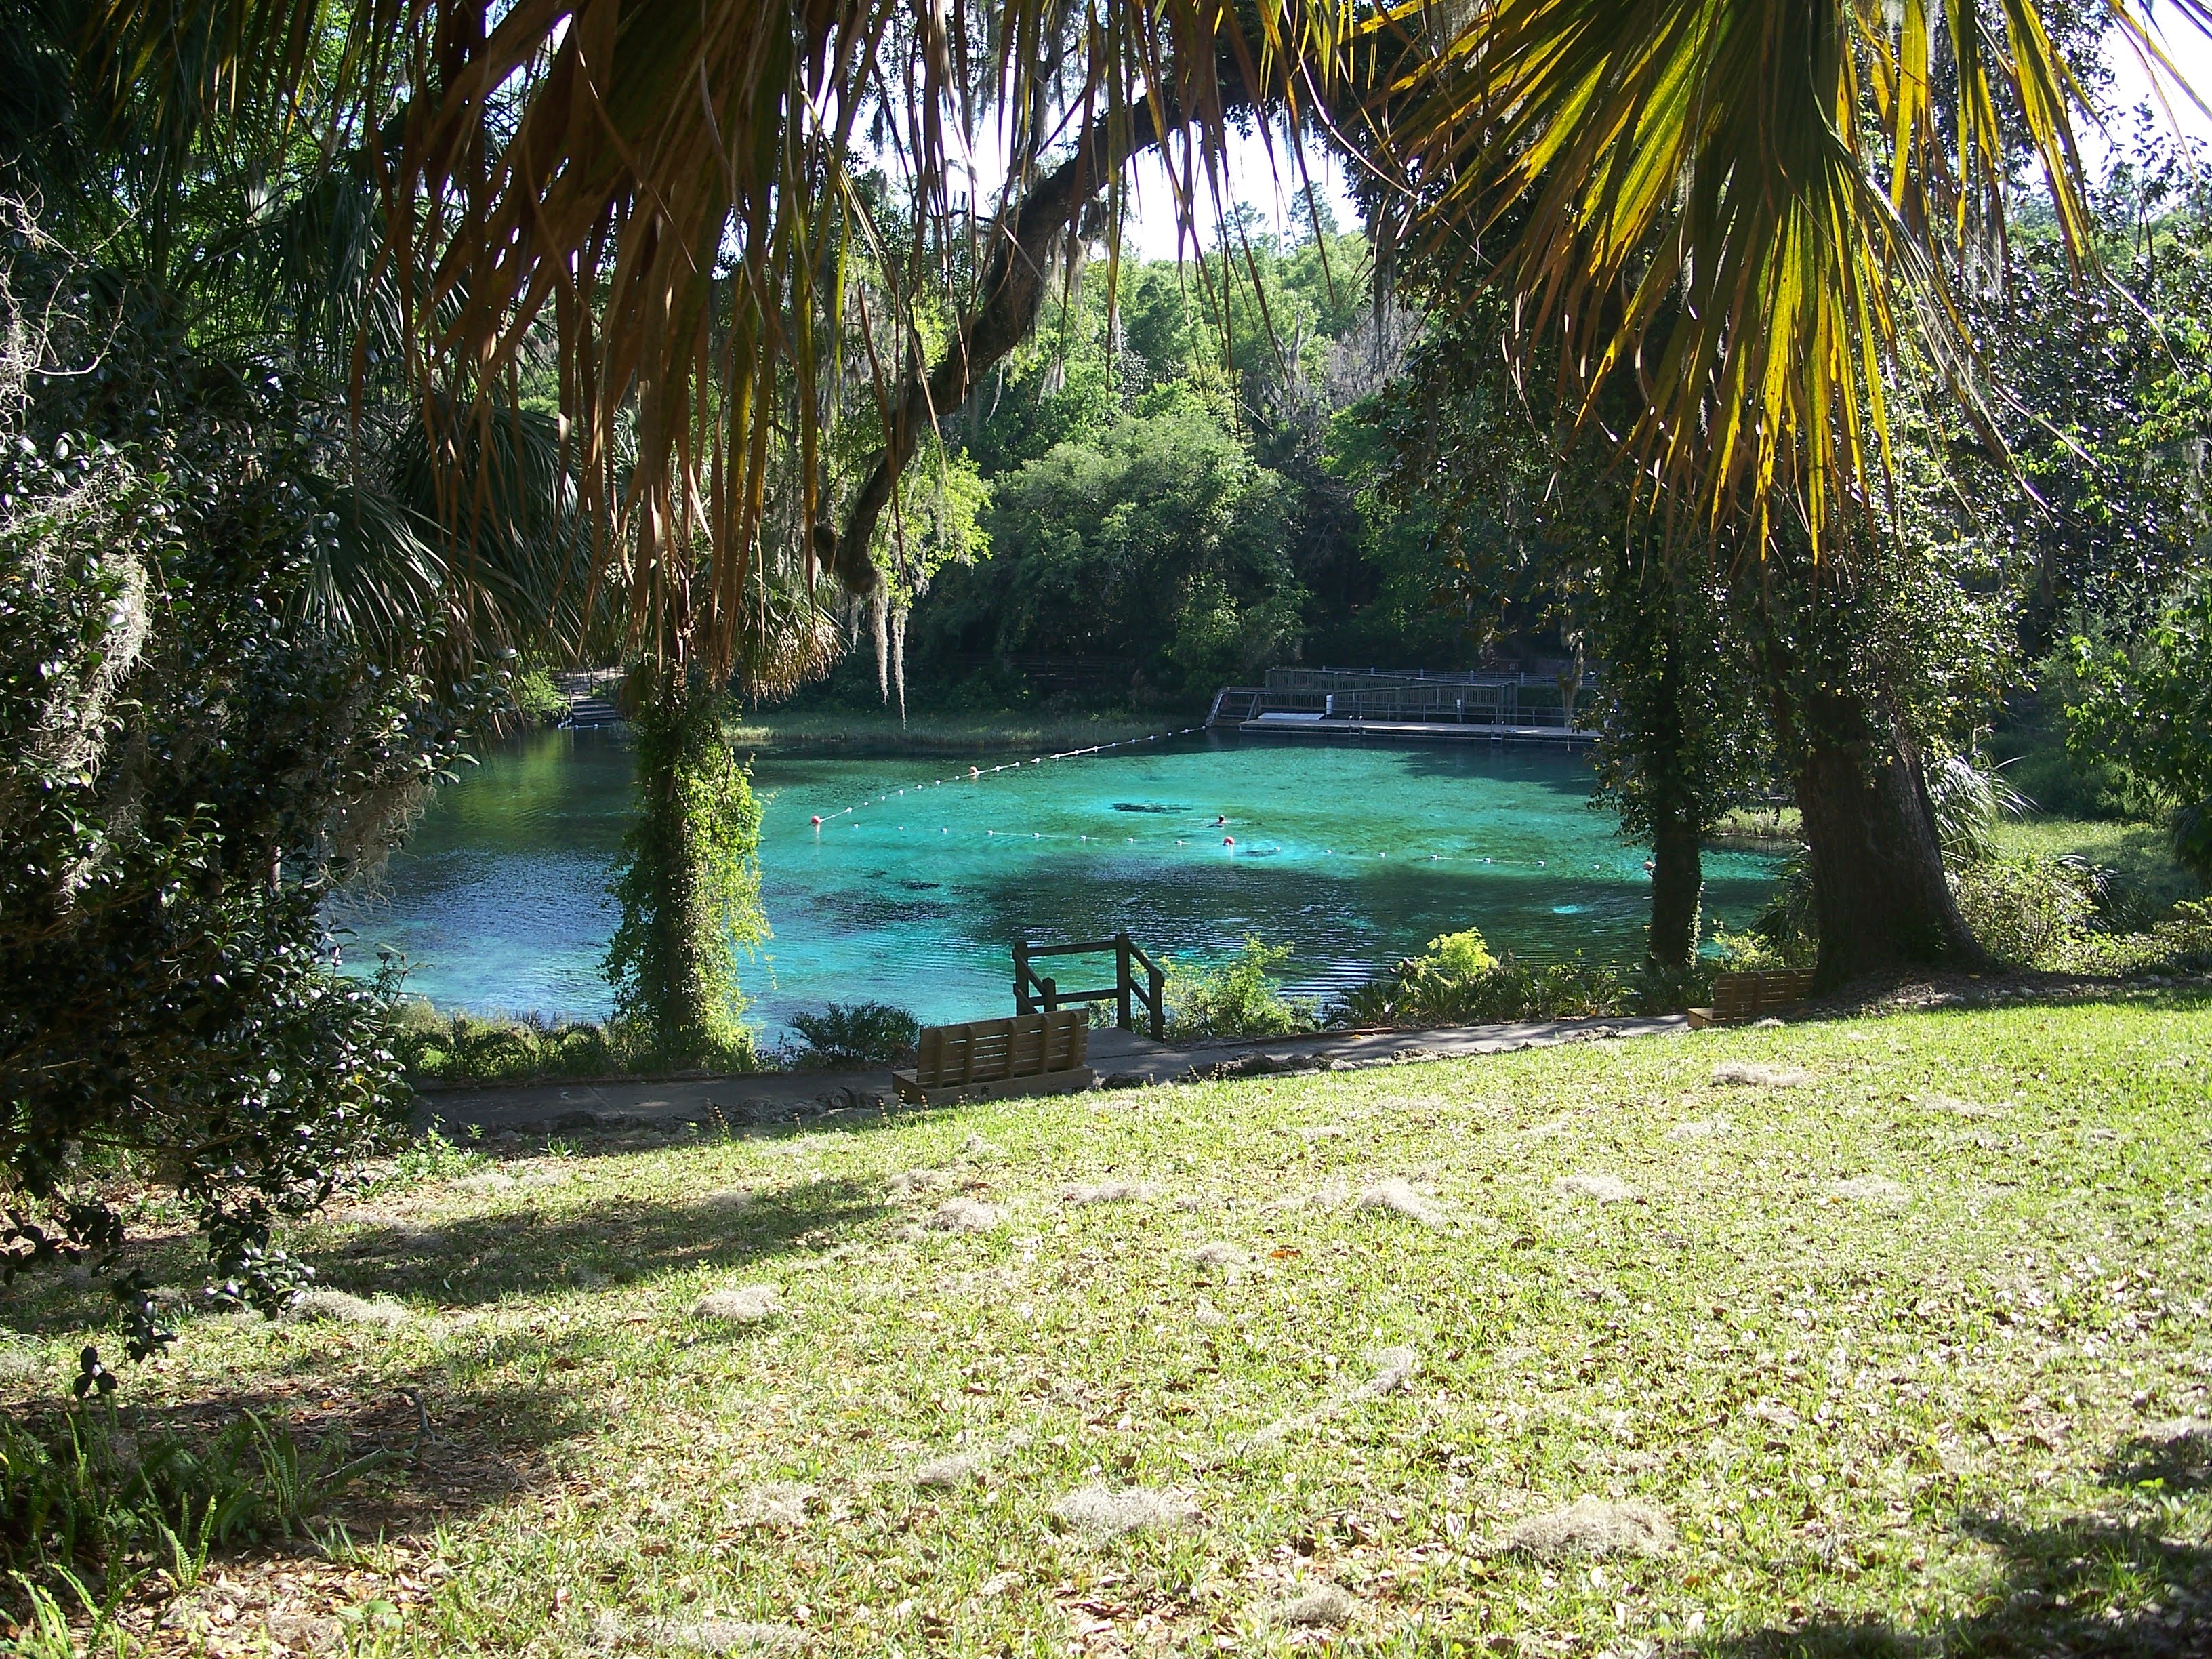 Fishing in Dunnellon, Florida - Discover Dunnellon